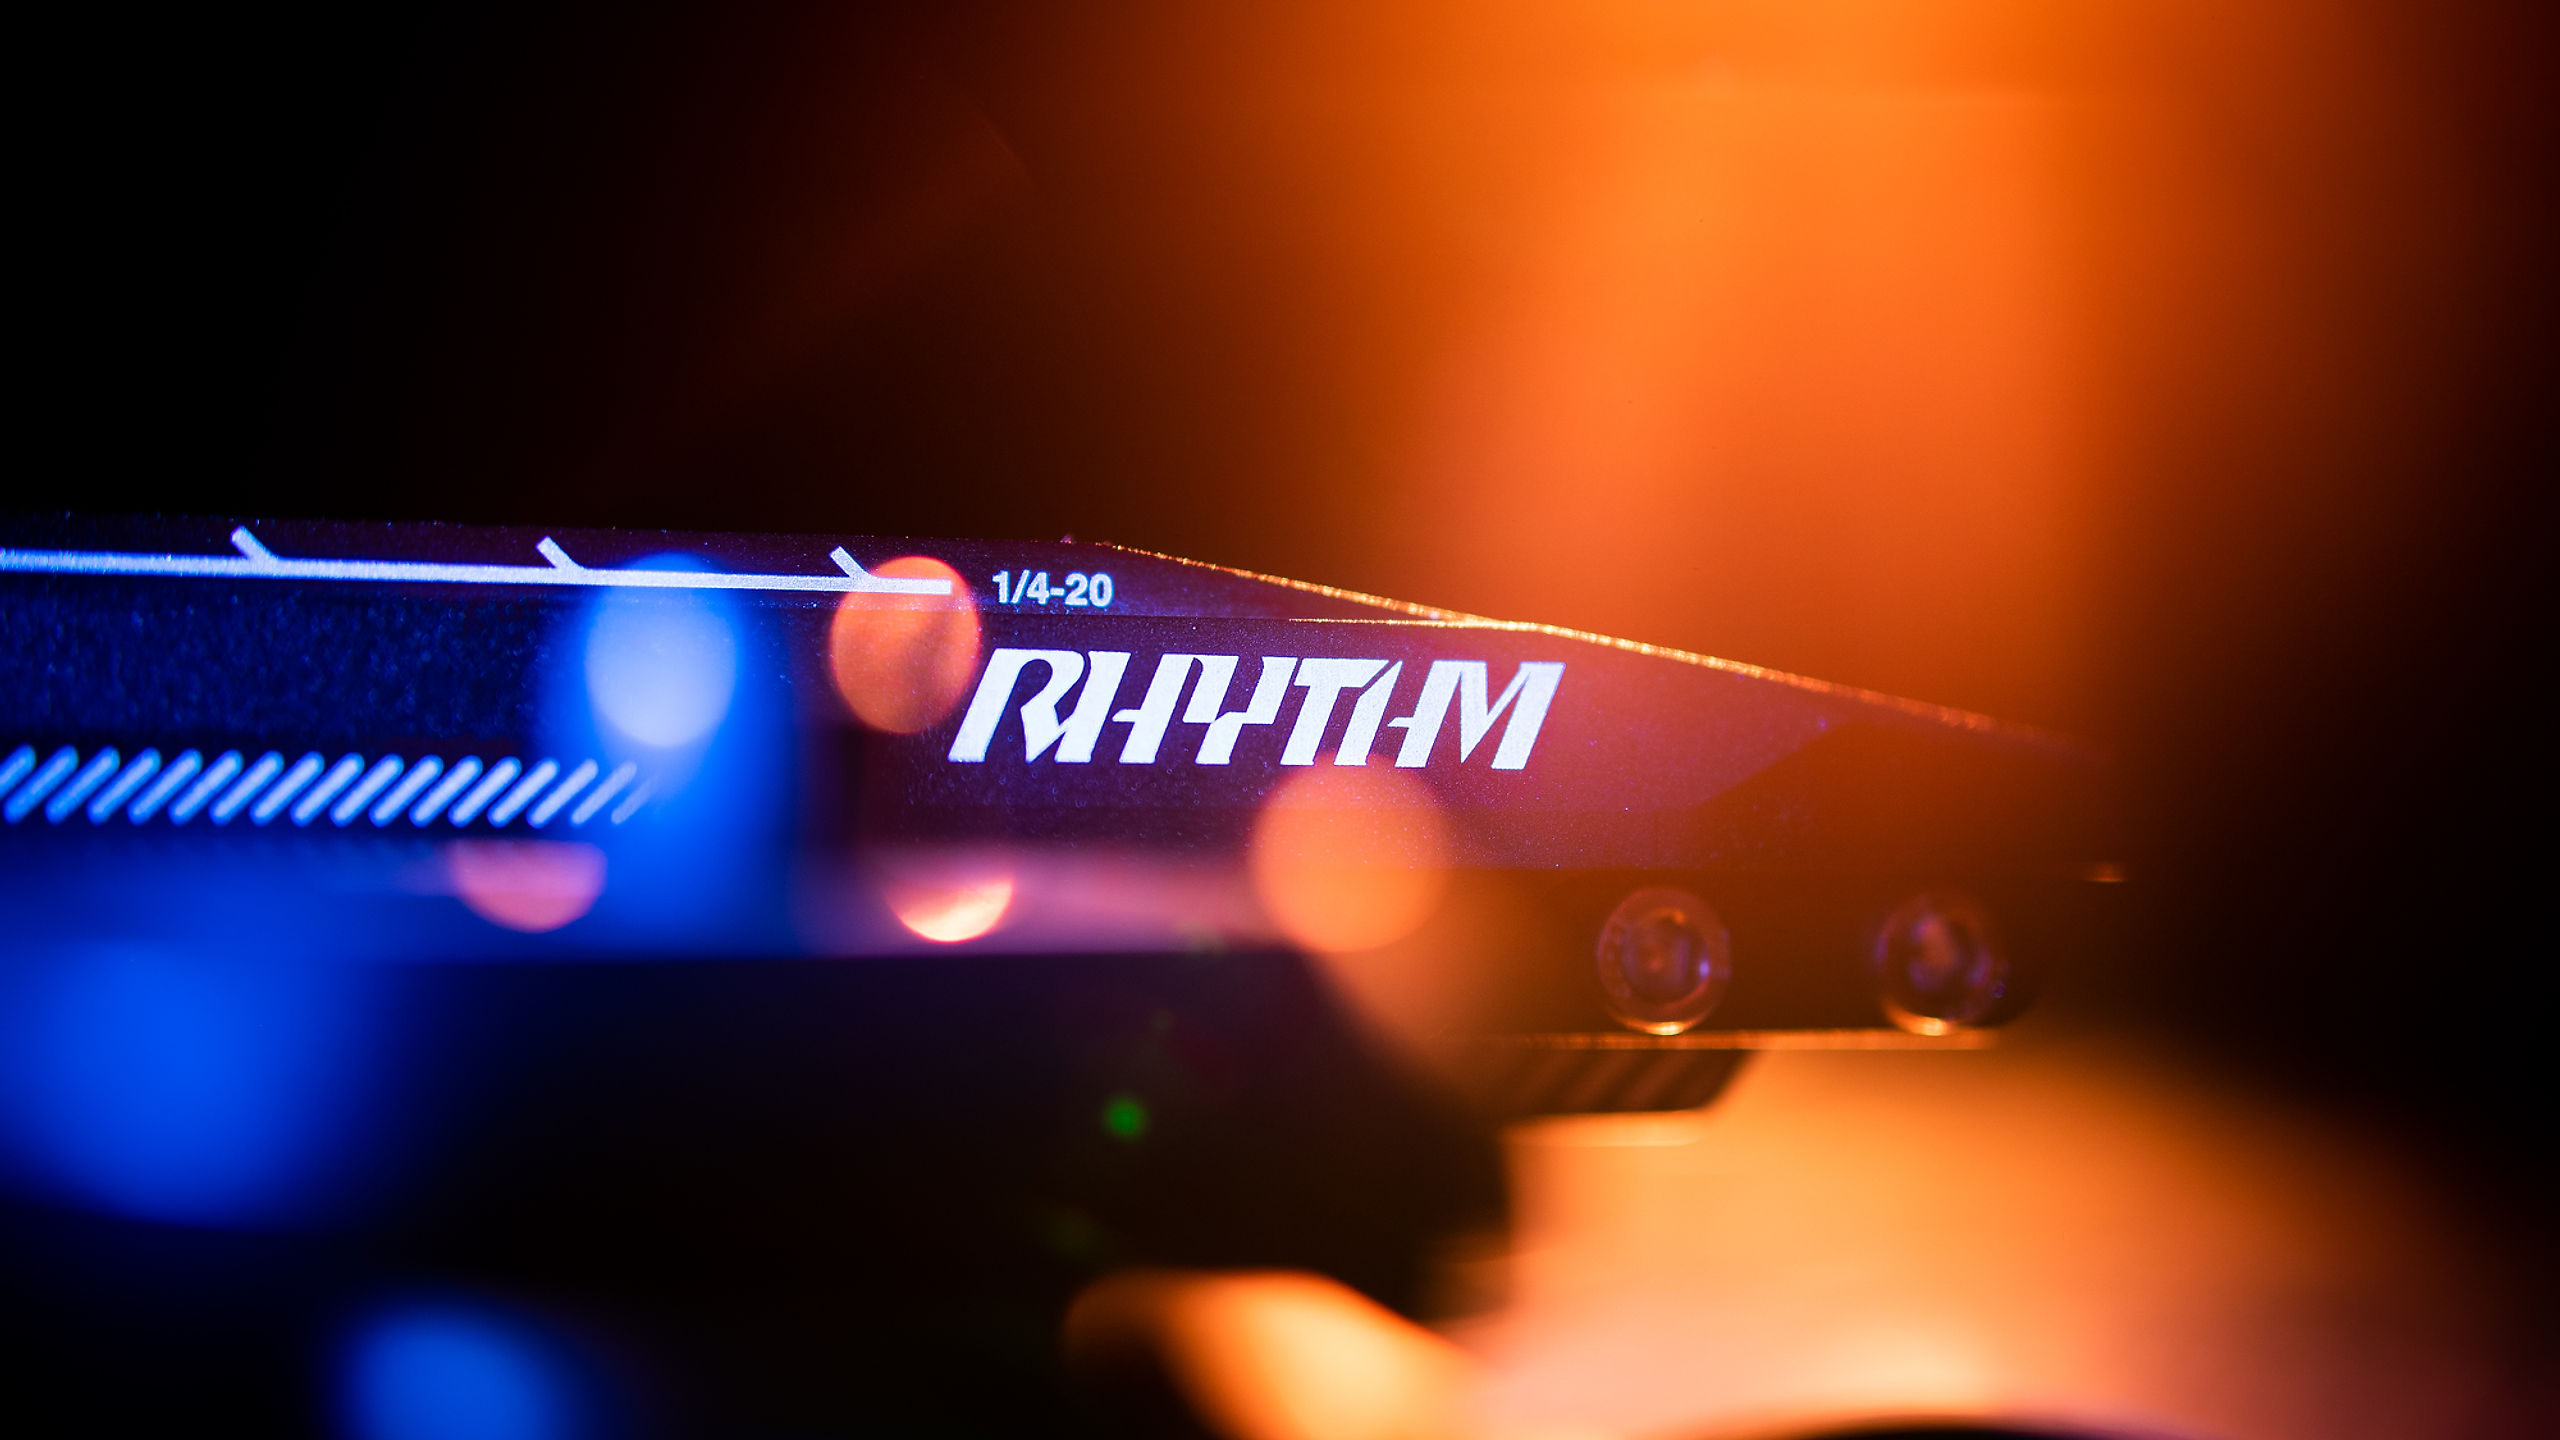 Introducing The Rhythm Compact